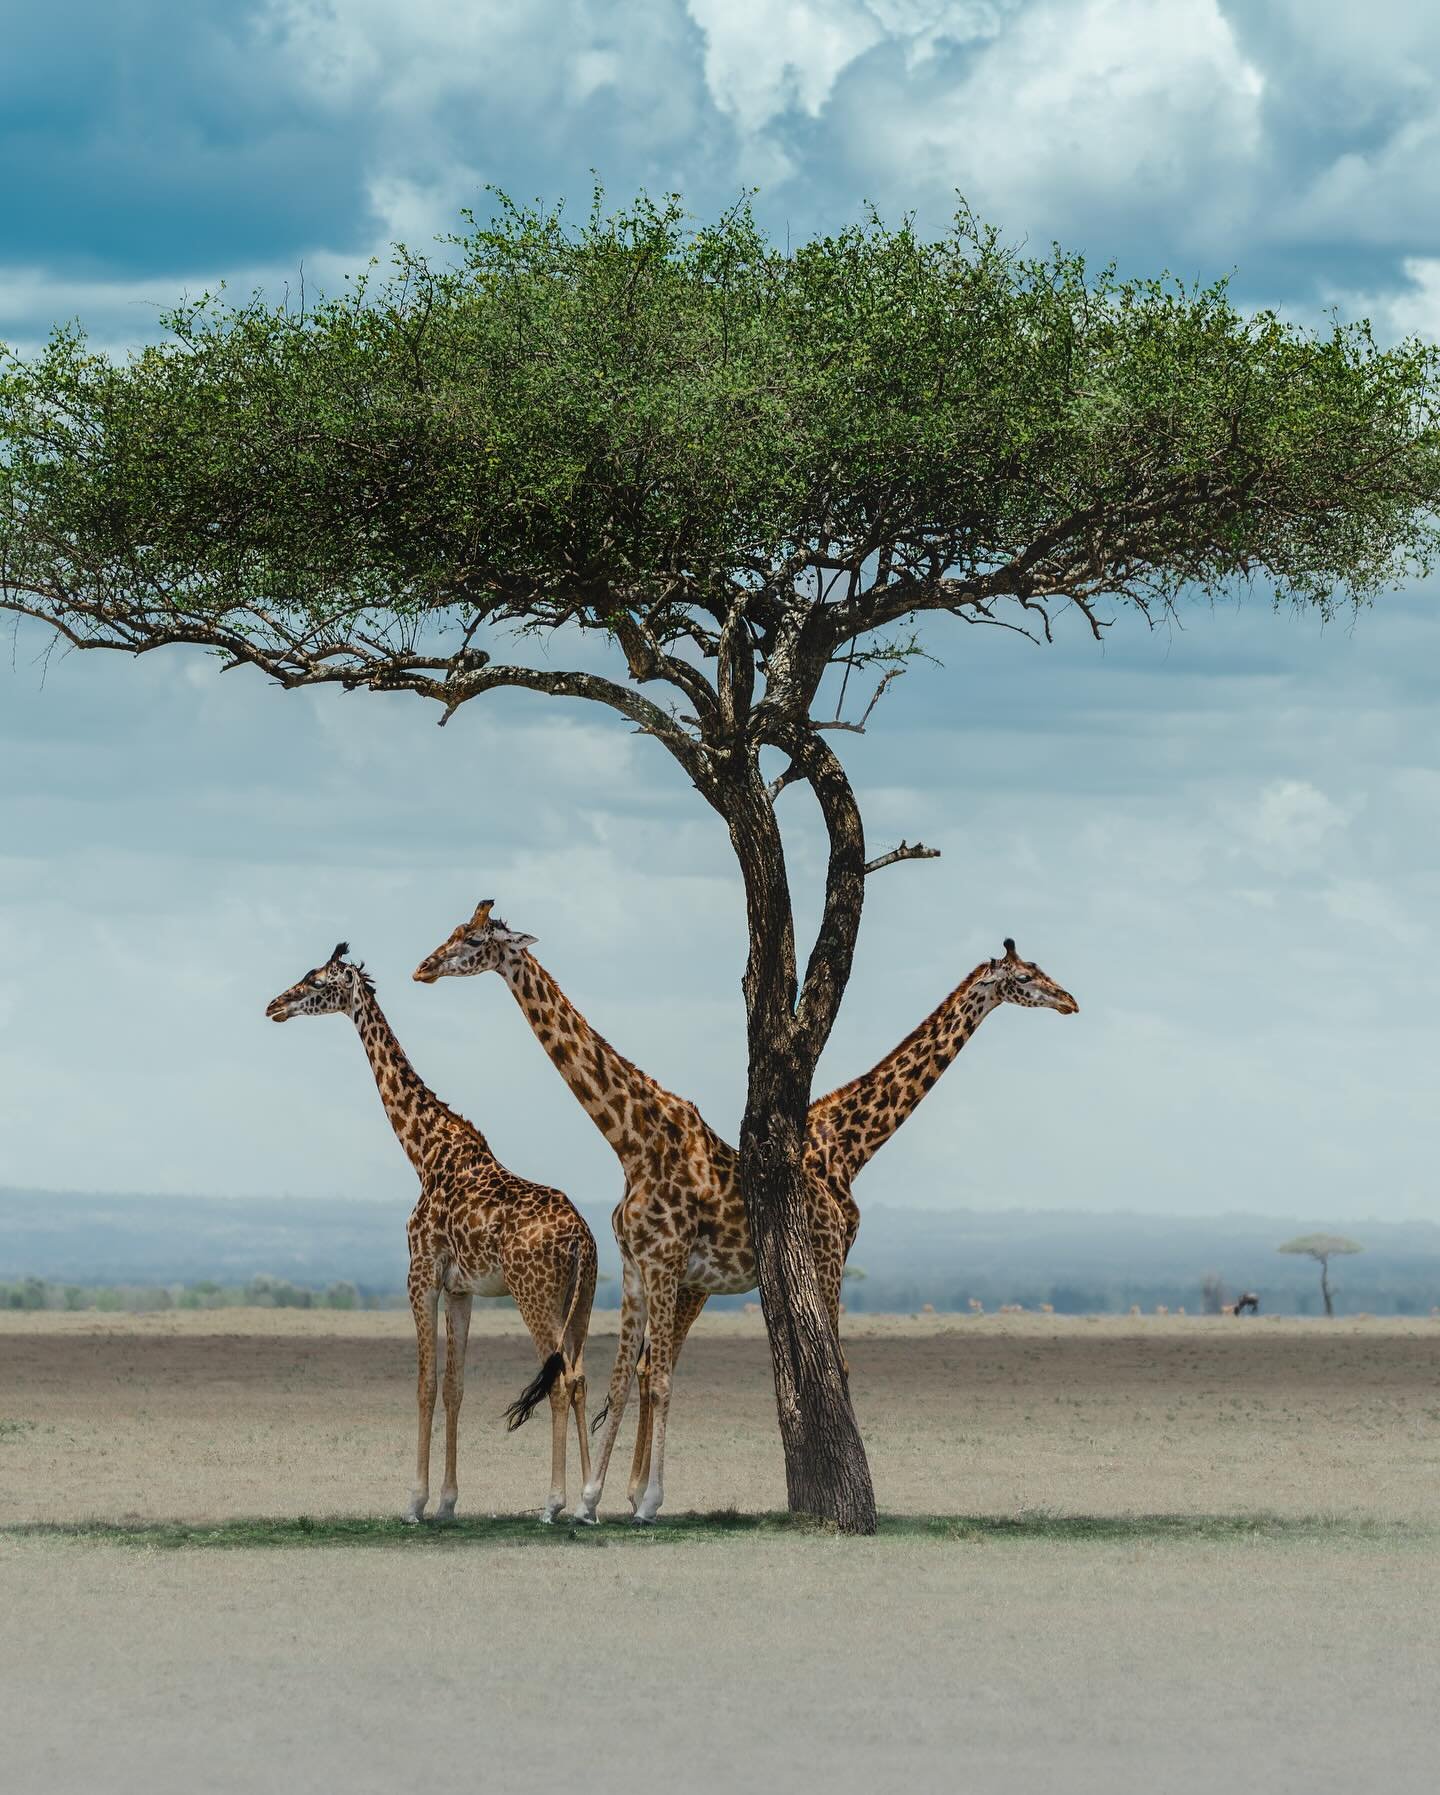 Giraffes 🤝🏼 Umbrella trees 🌳🦒

&mdash; When I first posted my image of the giraffe &amp; zebras together in the shade (swipe to see 🦓), one of the main questions I received was &quot;why is he on his own/where is the rest of his herd?!&quot; so 